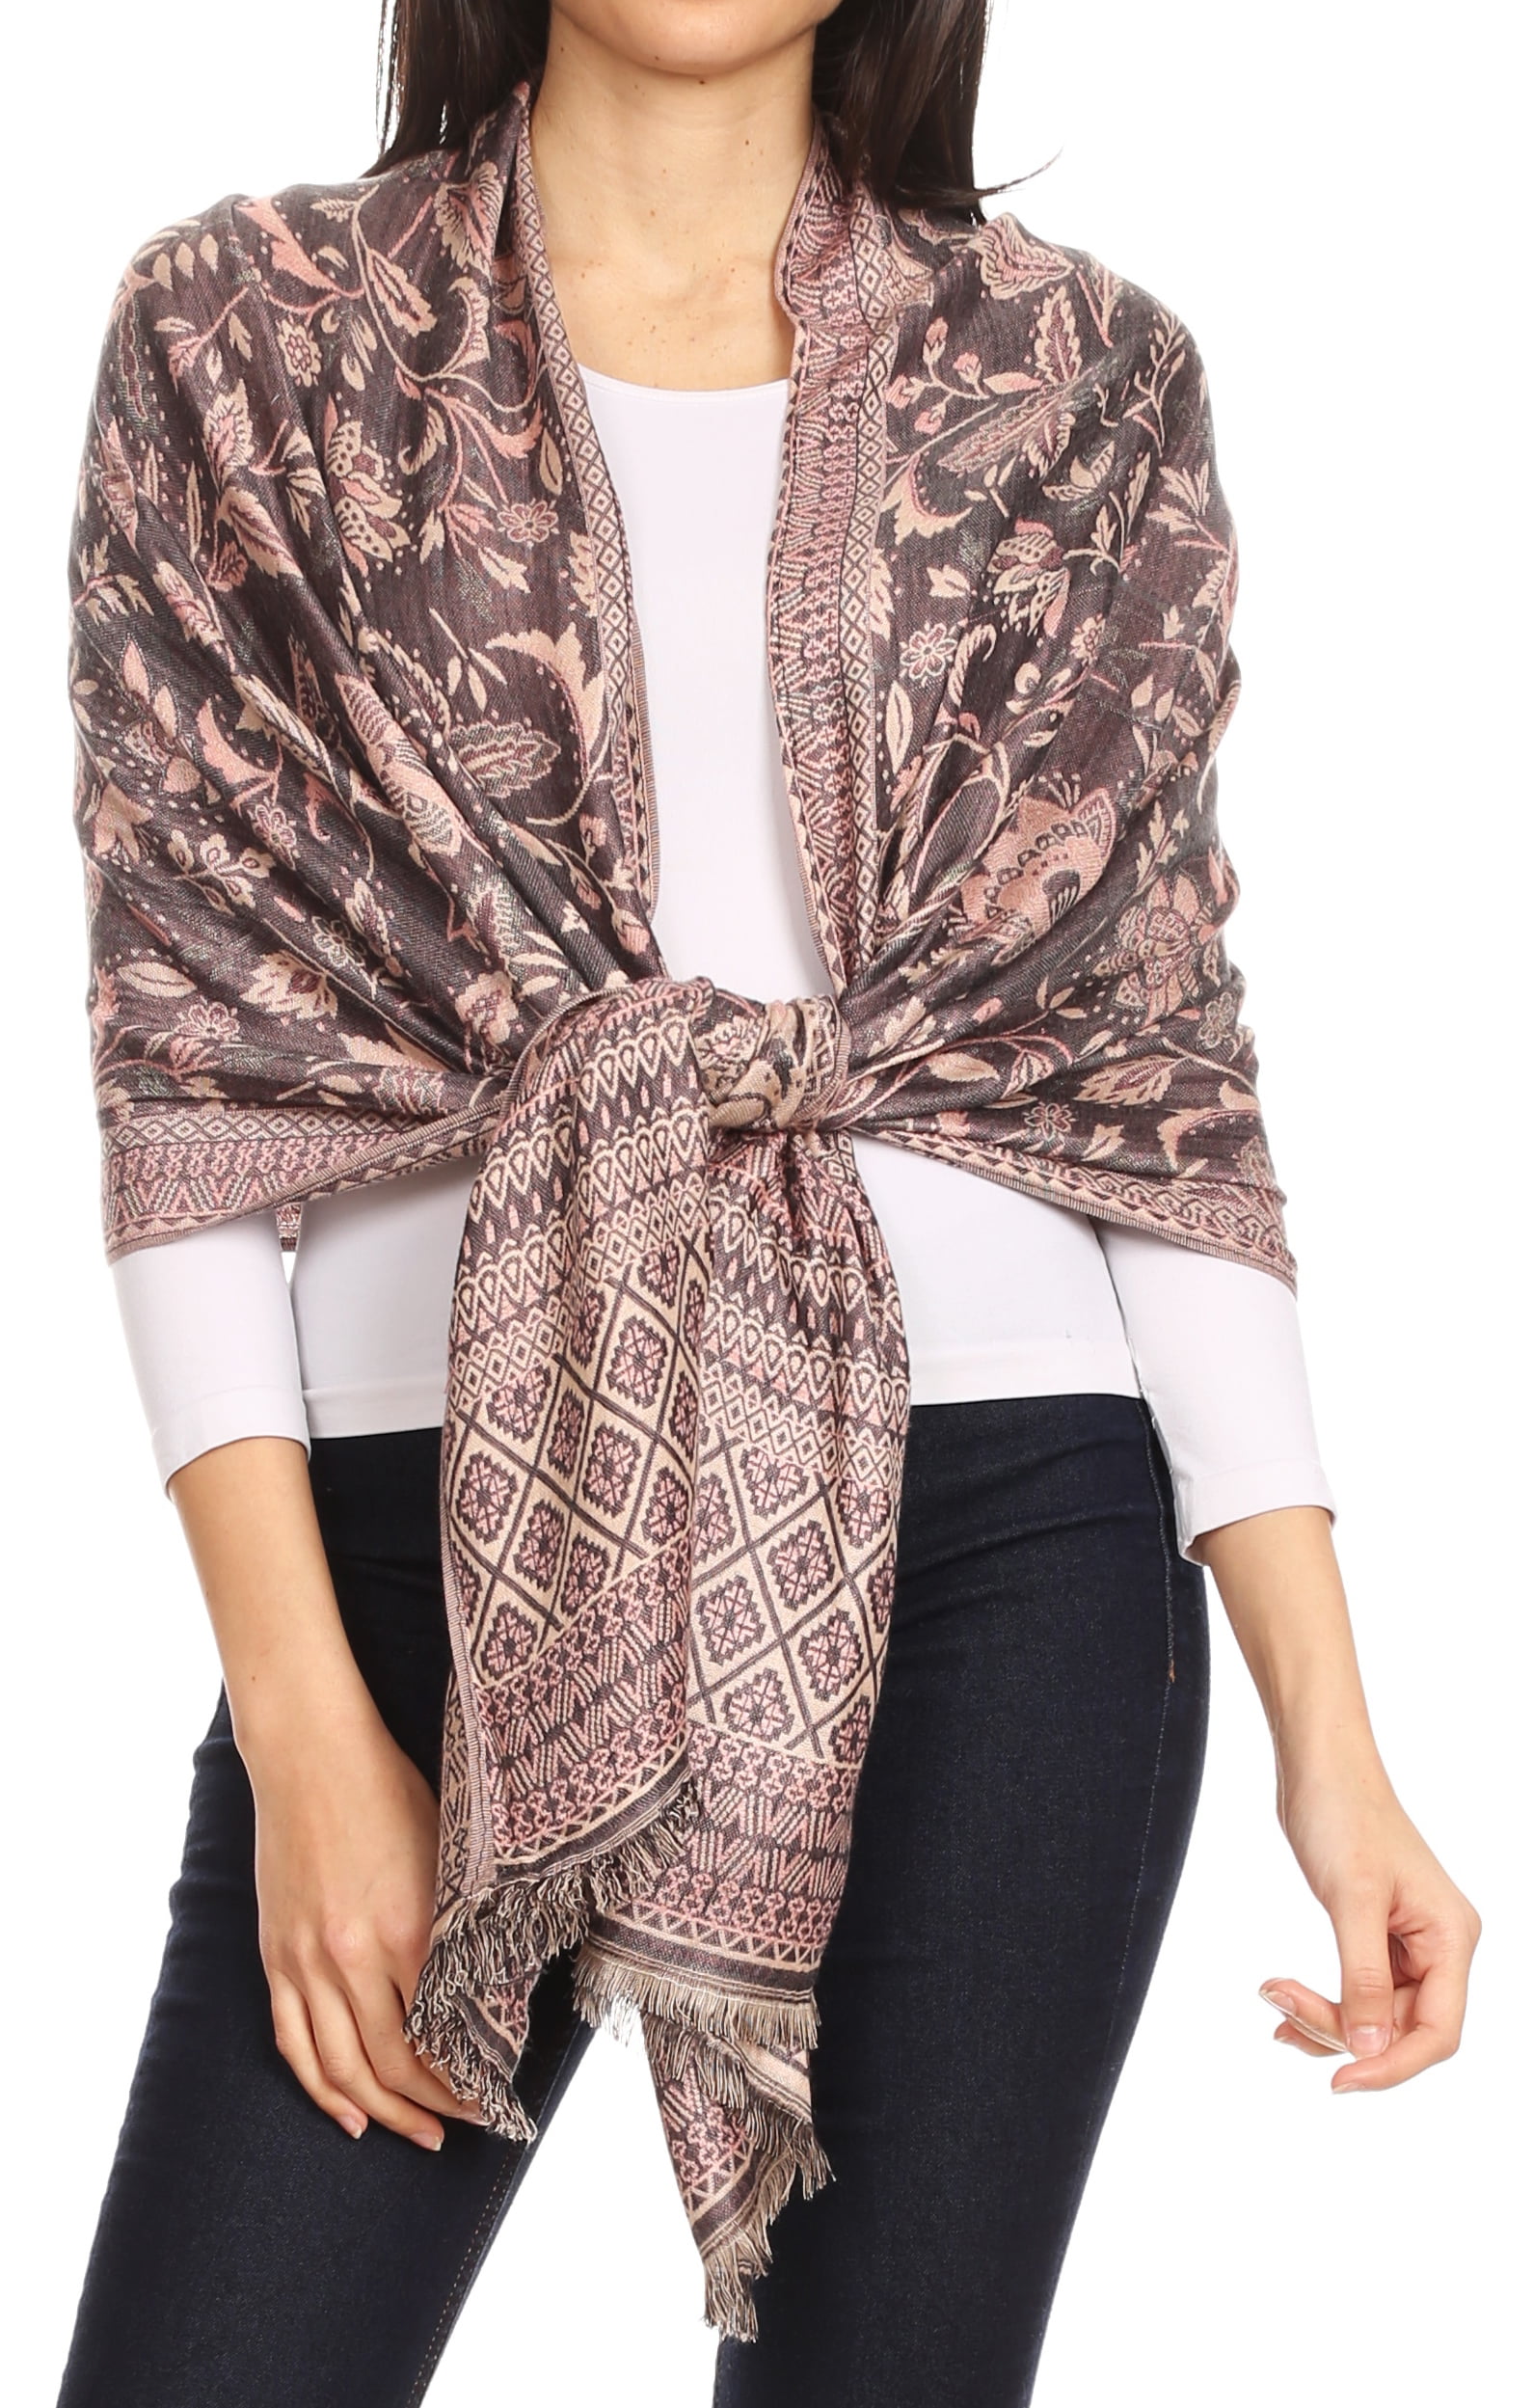 Anni Floral Pashmina Shawl Wraps Scarf Lightweight Silky Large 2 Tones Shawls and Wraps Scarves for Women